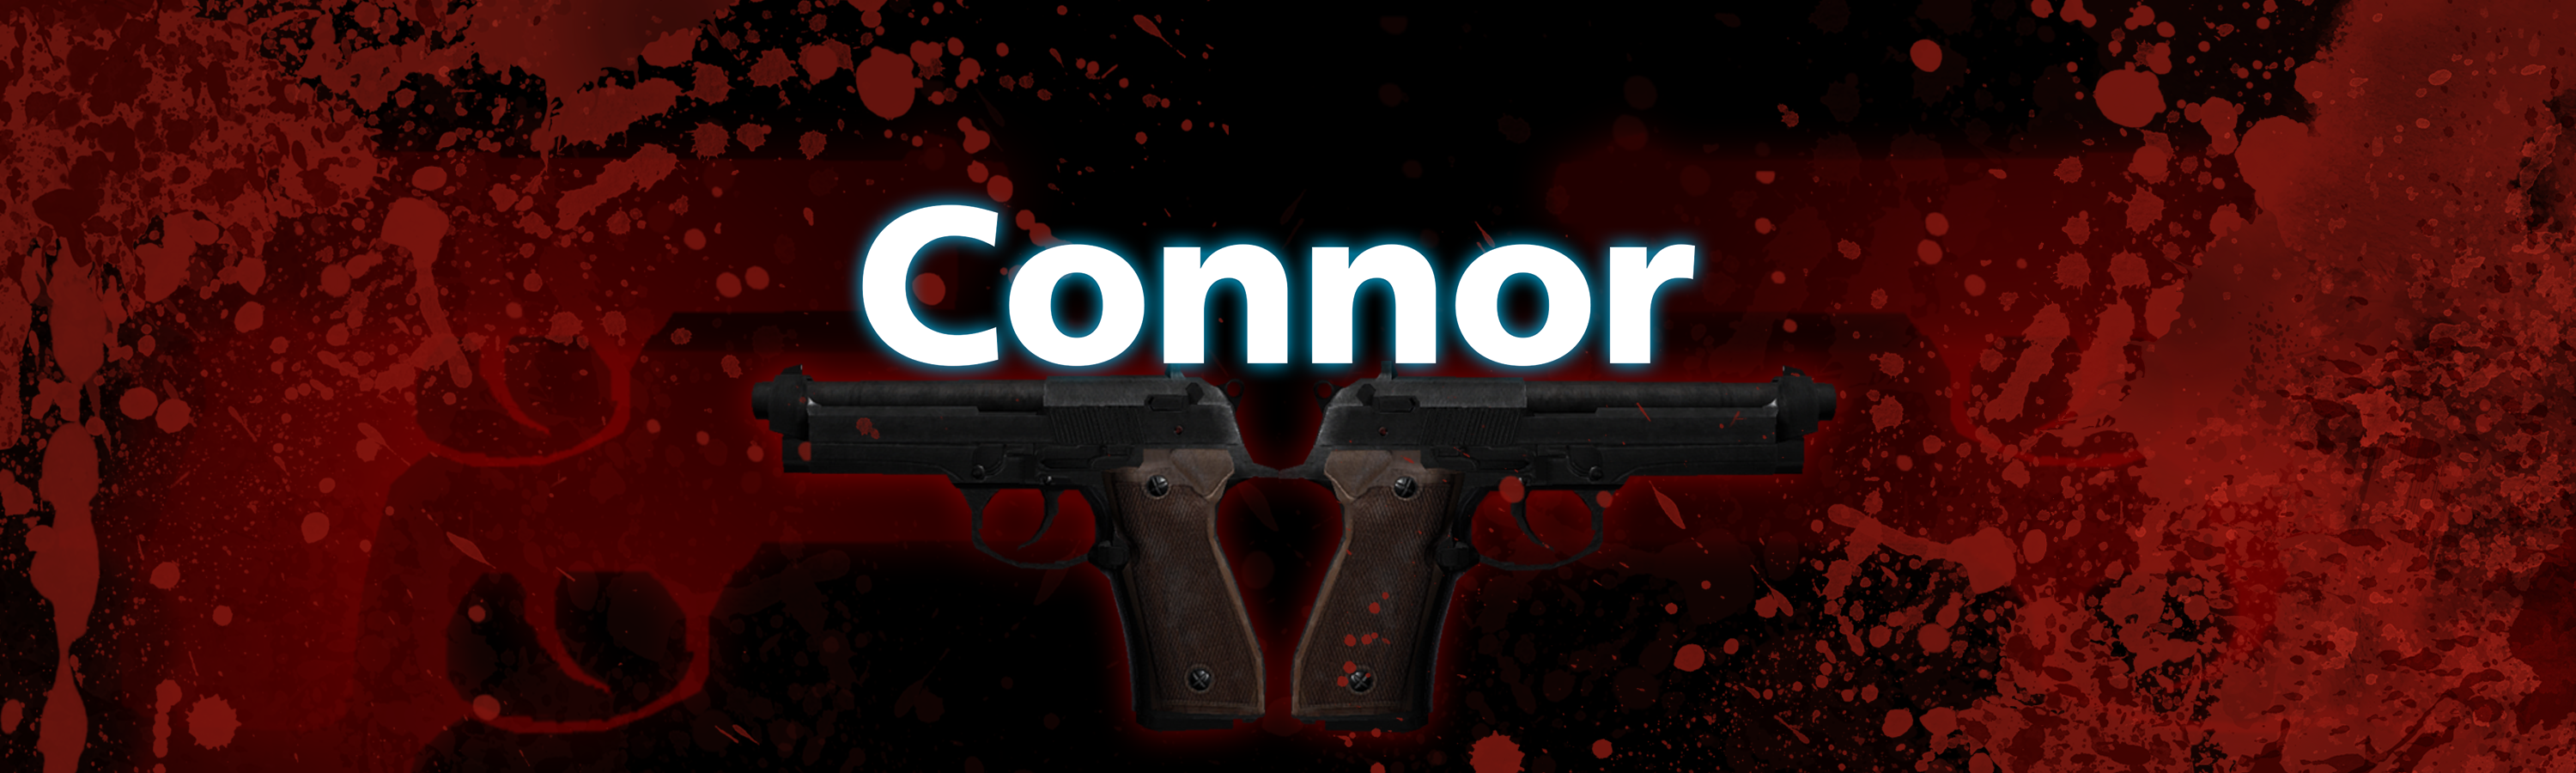 Connor PCVR